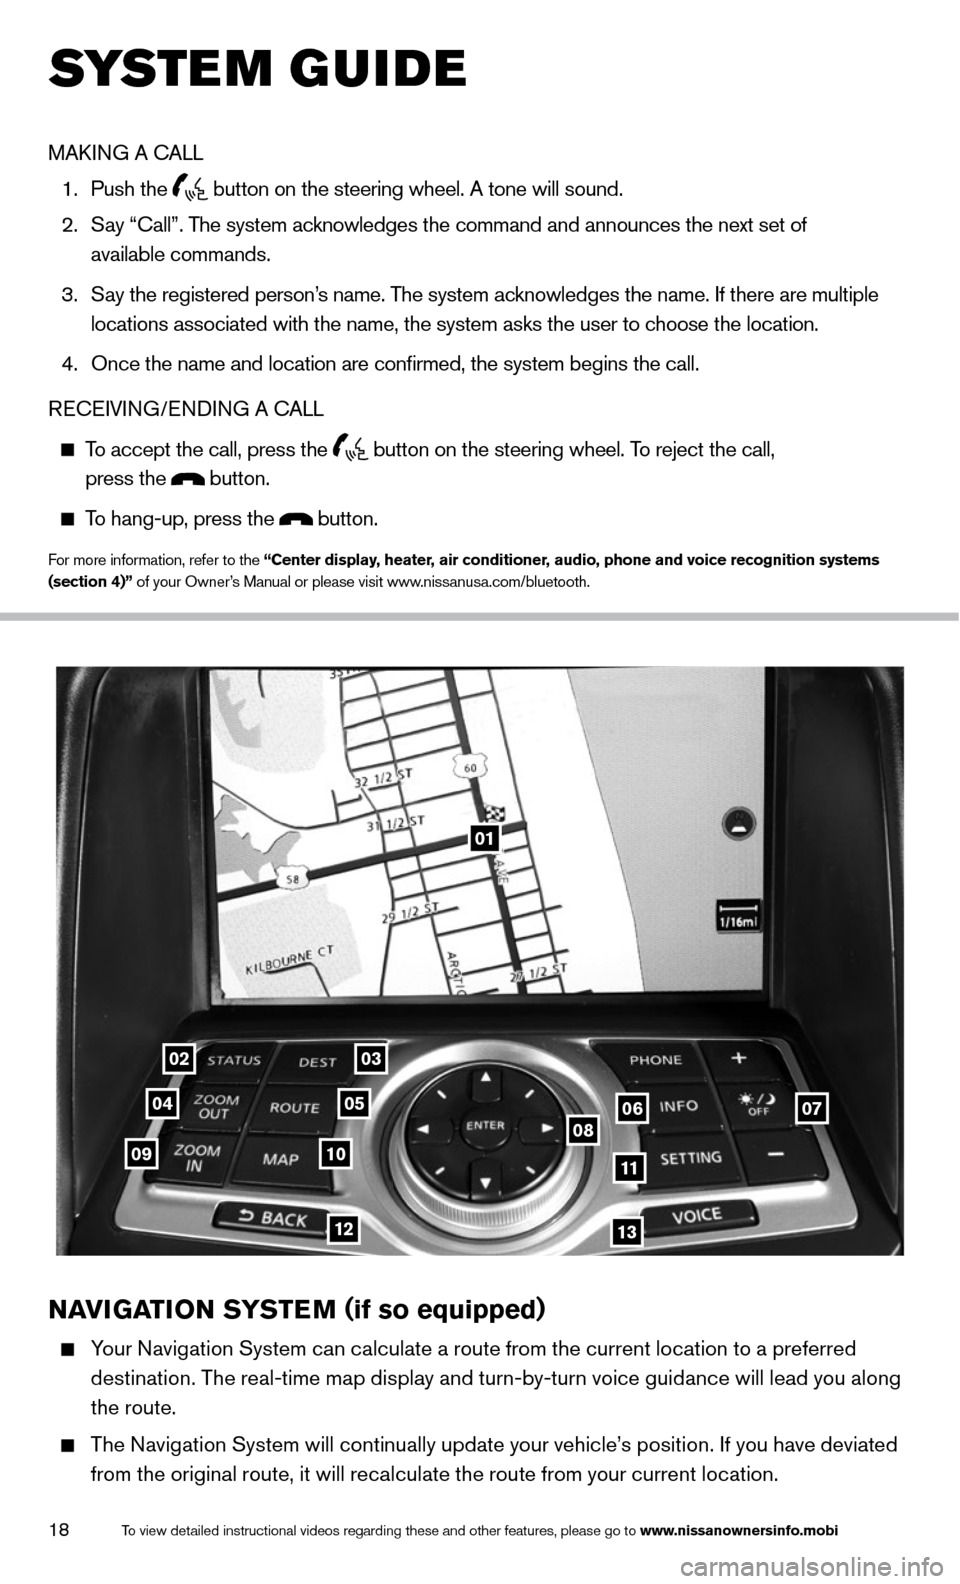 NISSAN 370Z ROADSTER 2014 Z34 Quick Reference Guide 18
01
0203
0405060708091011
1213
NAVIGATION SYSTEM (if so equipped)
     Your Navigation System can calculate a route from the current location to a preferred 
destination. The real-time map display a